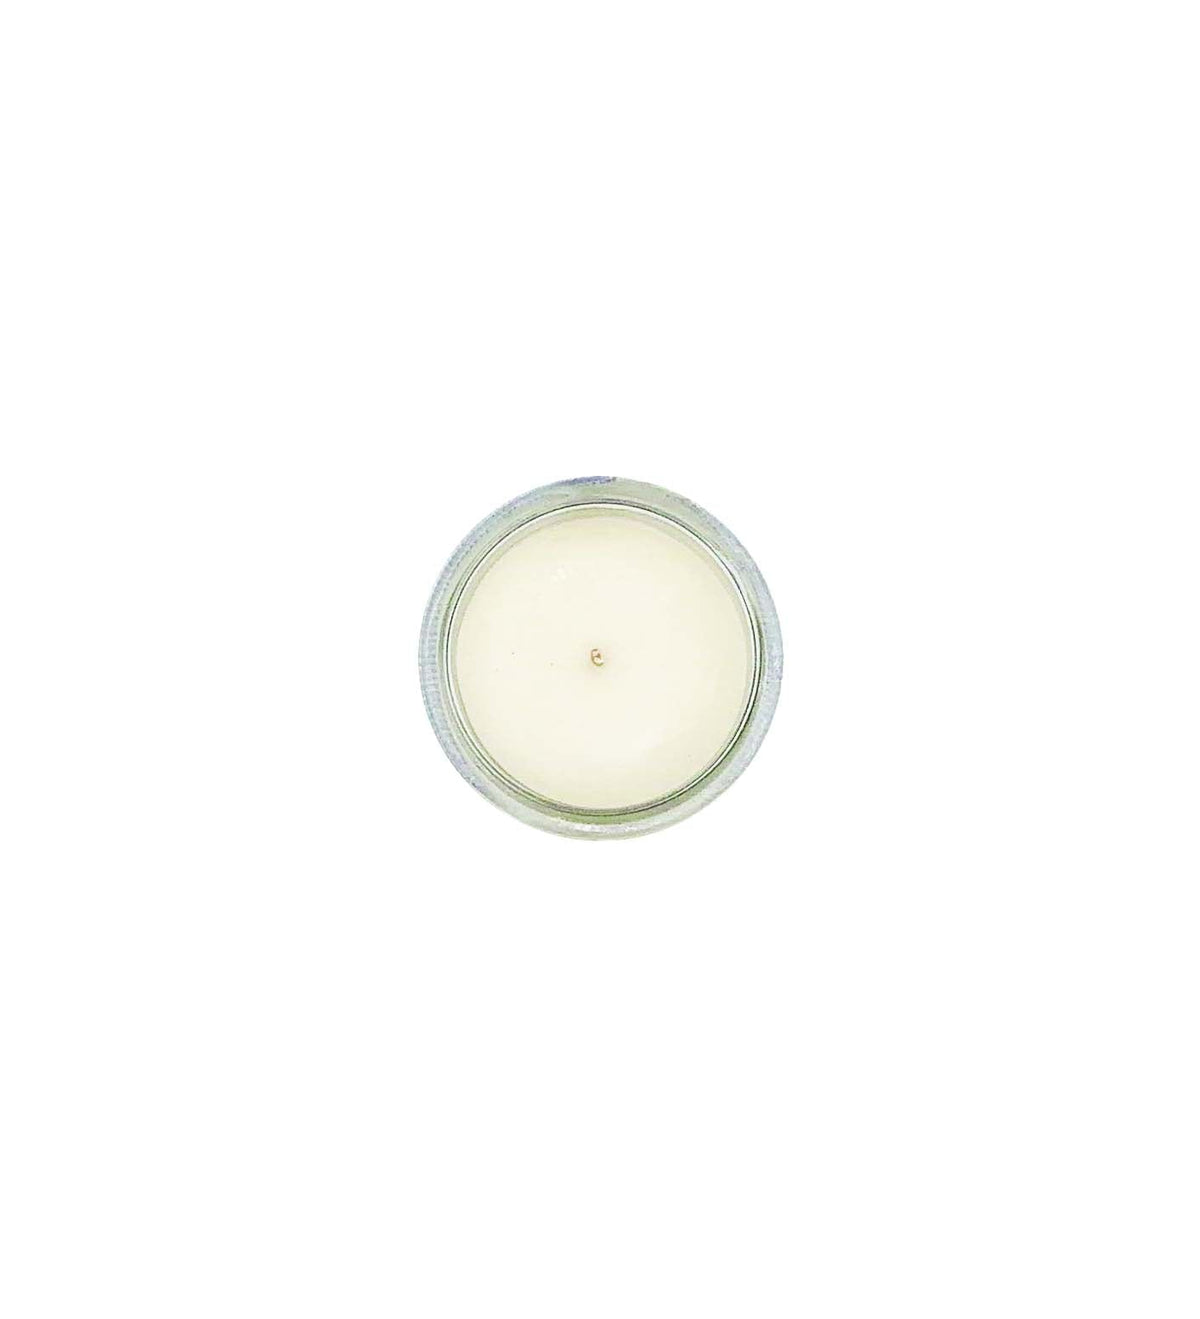 SUMMER ROSE SMALL CANDLE